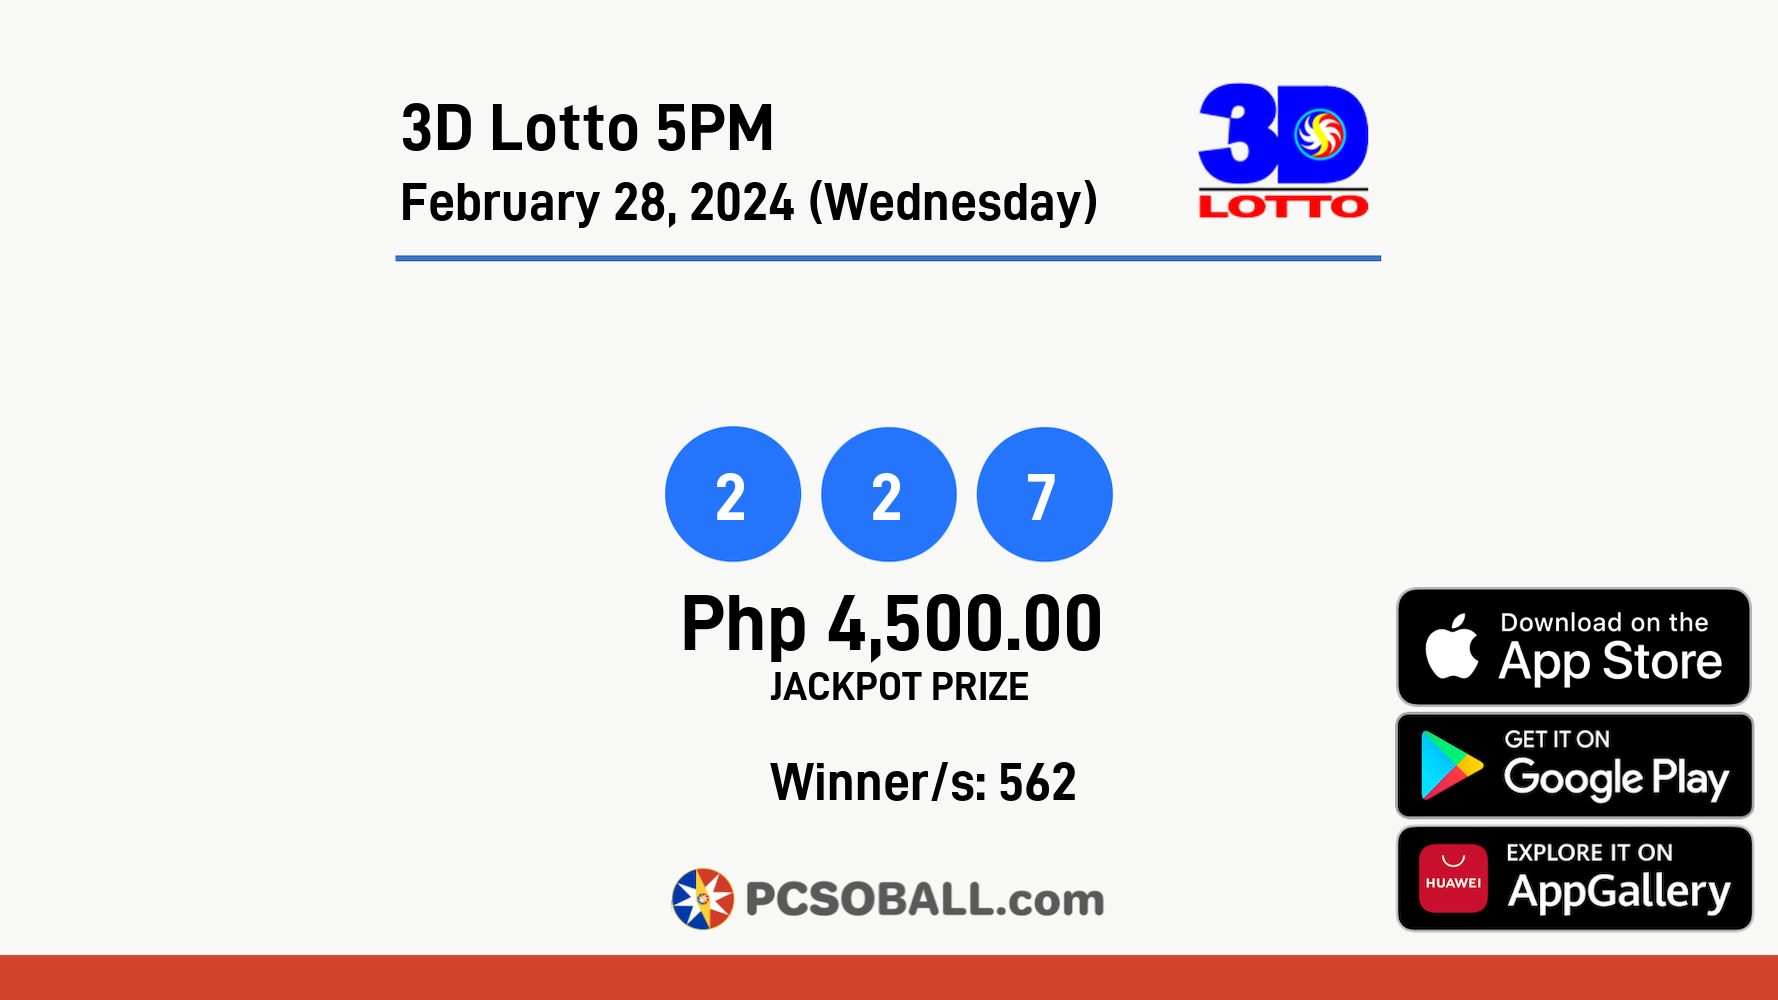 3D Lotto 5PM February 28, 2024 (Wednesday) Result